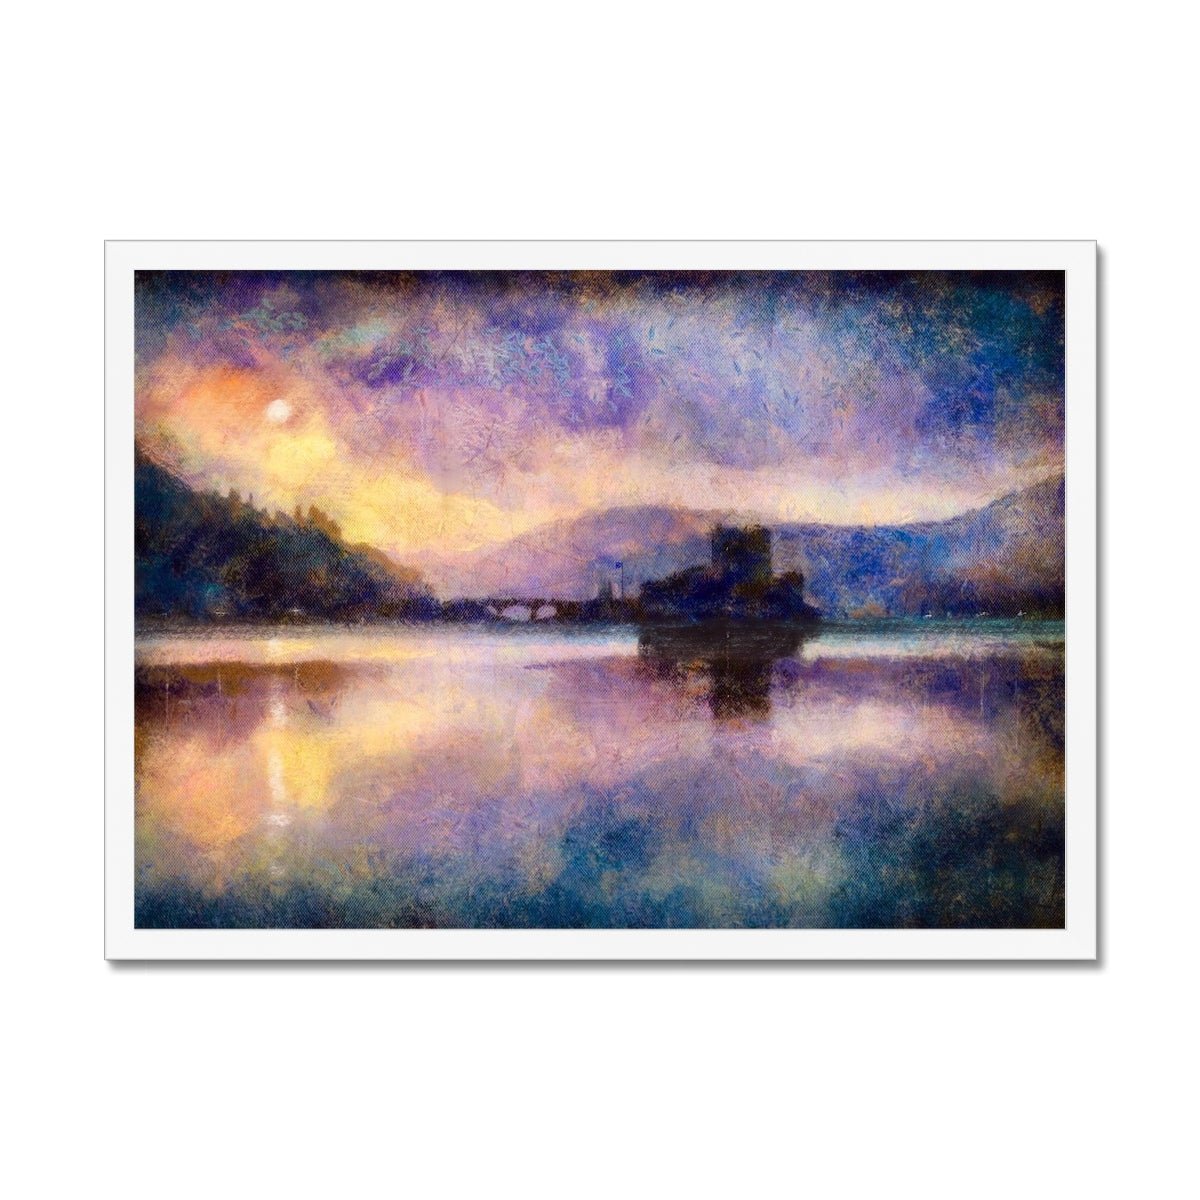 Eilean Donan Castle Moonlight Painting | Framed Prints From Scotland-Framed Prints-Scottish Castles Art Gallery-A2 Landscape-White Frame-Paintings, Prints, Homeware, Art Gifts From Scotland By Scottish Artist Kevin Hunter